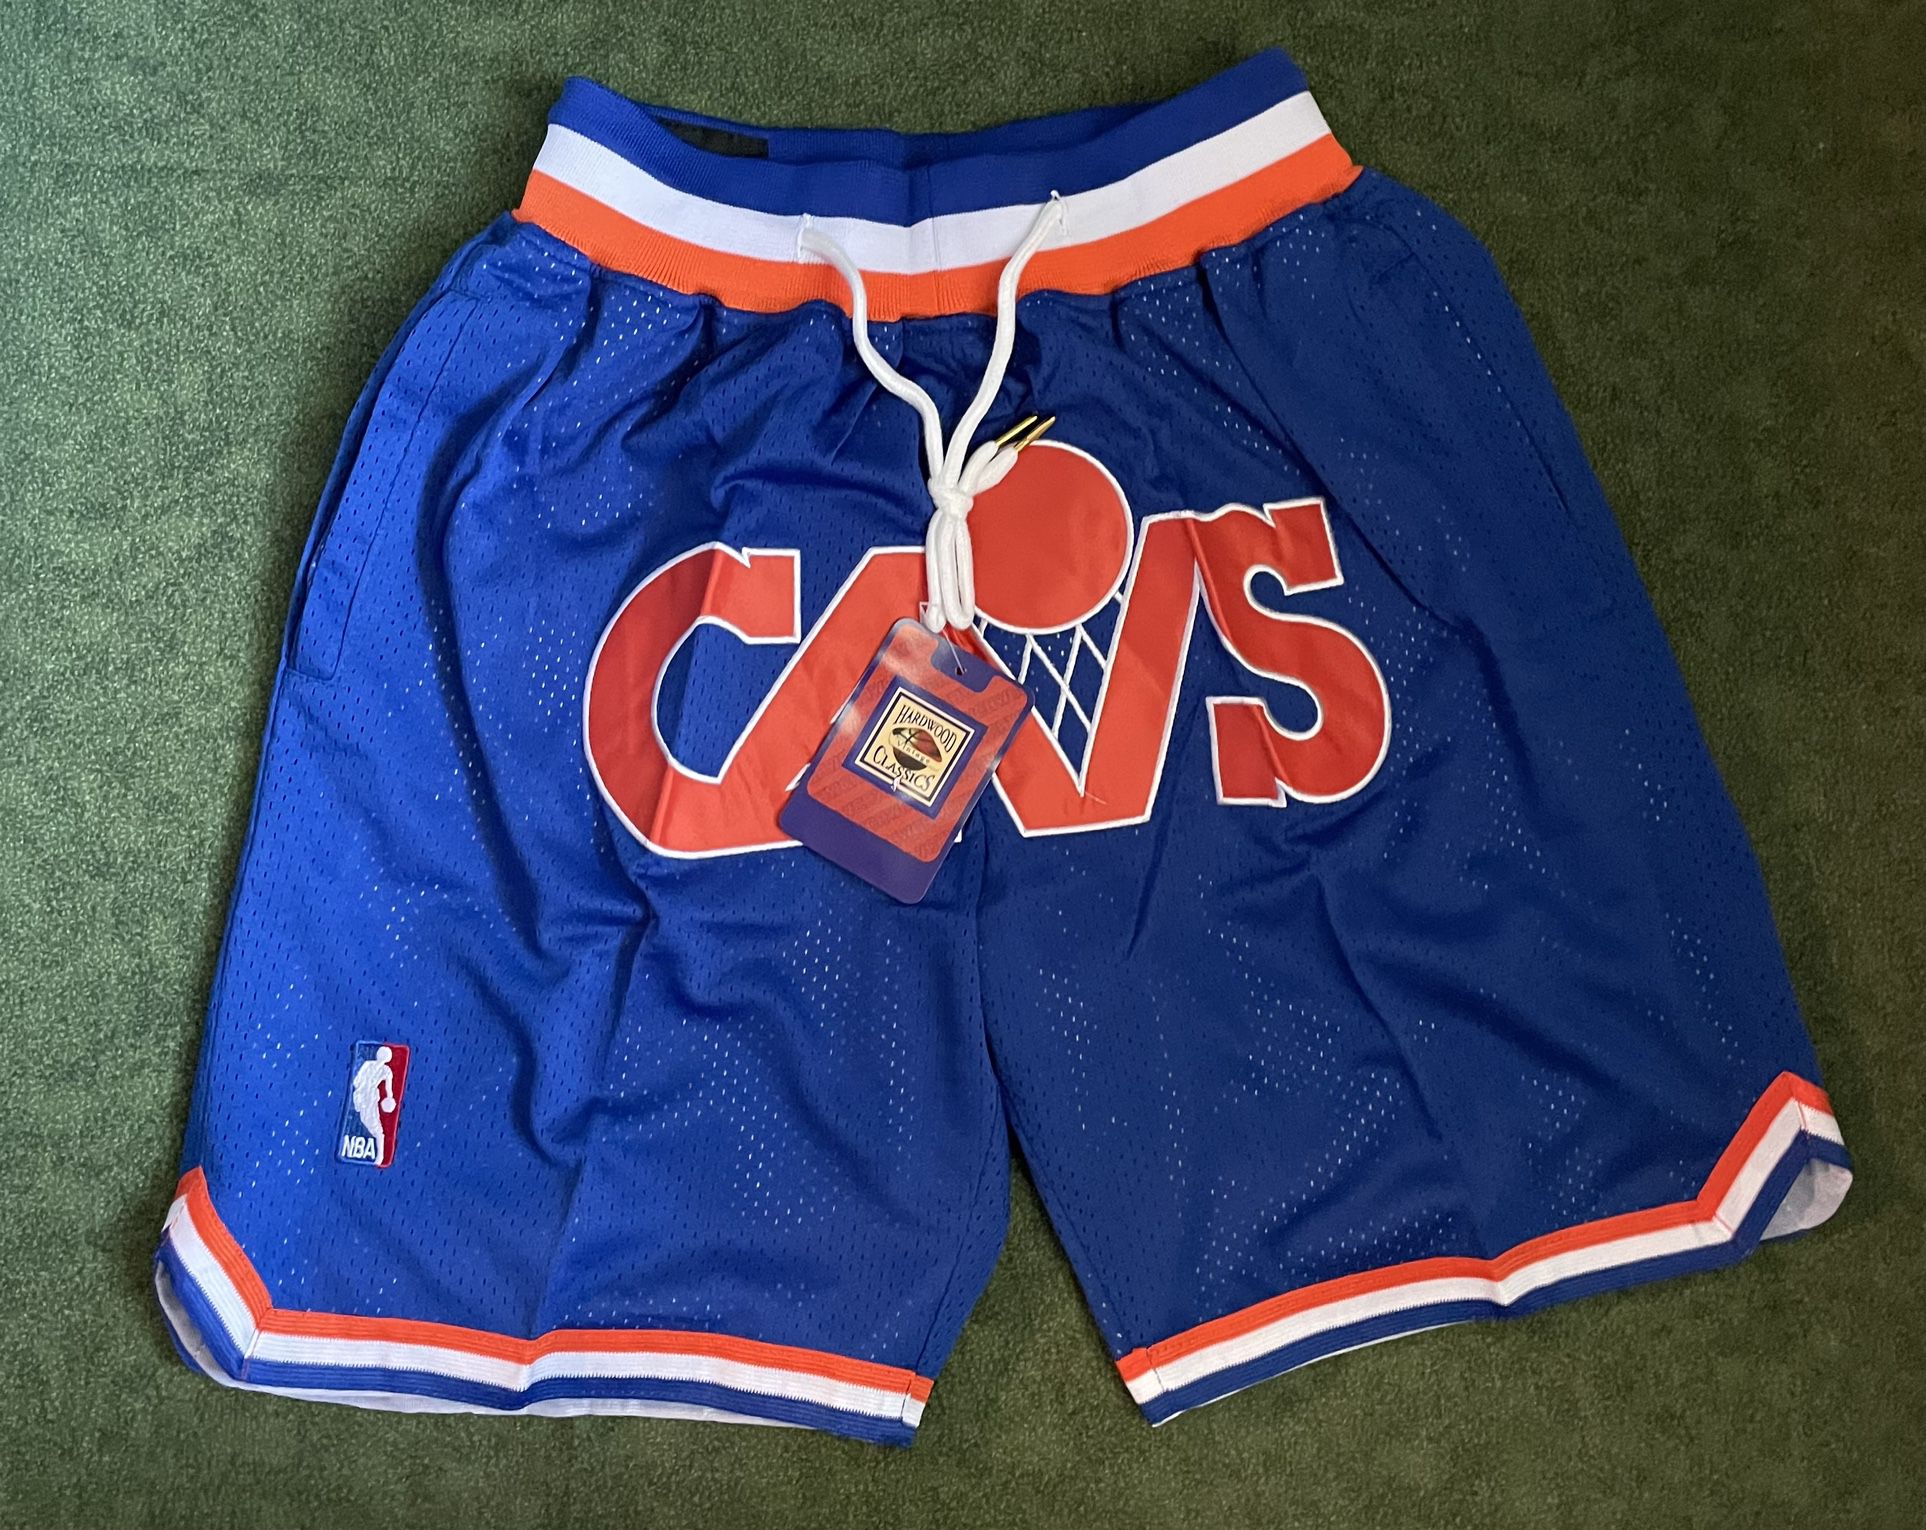 CLEVELAND CAVALIERS JUST DON NBA BASKETBALL SHORTS BRAND NEW WITH TAGS SIZES SMALL AND LARGE AVAILABLE